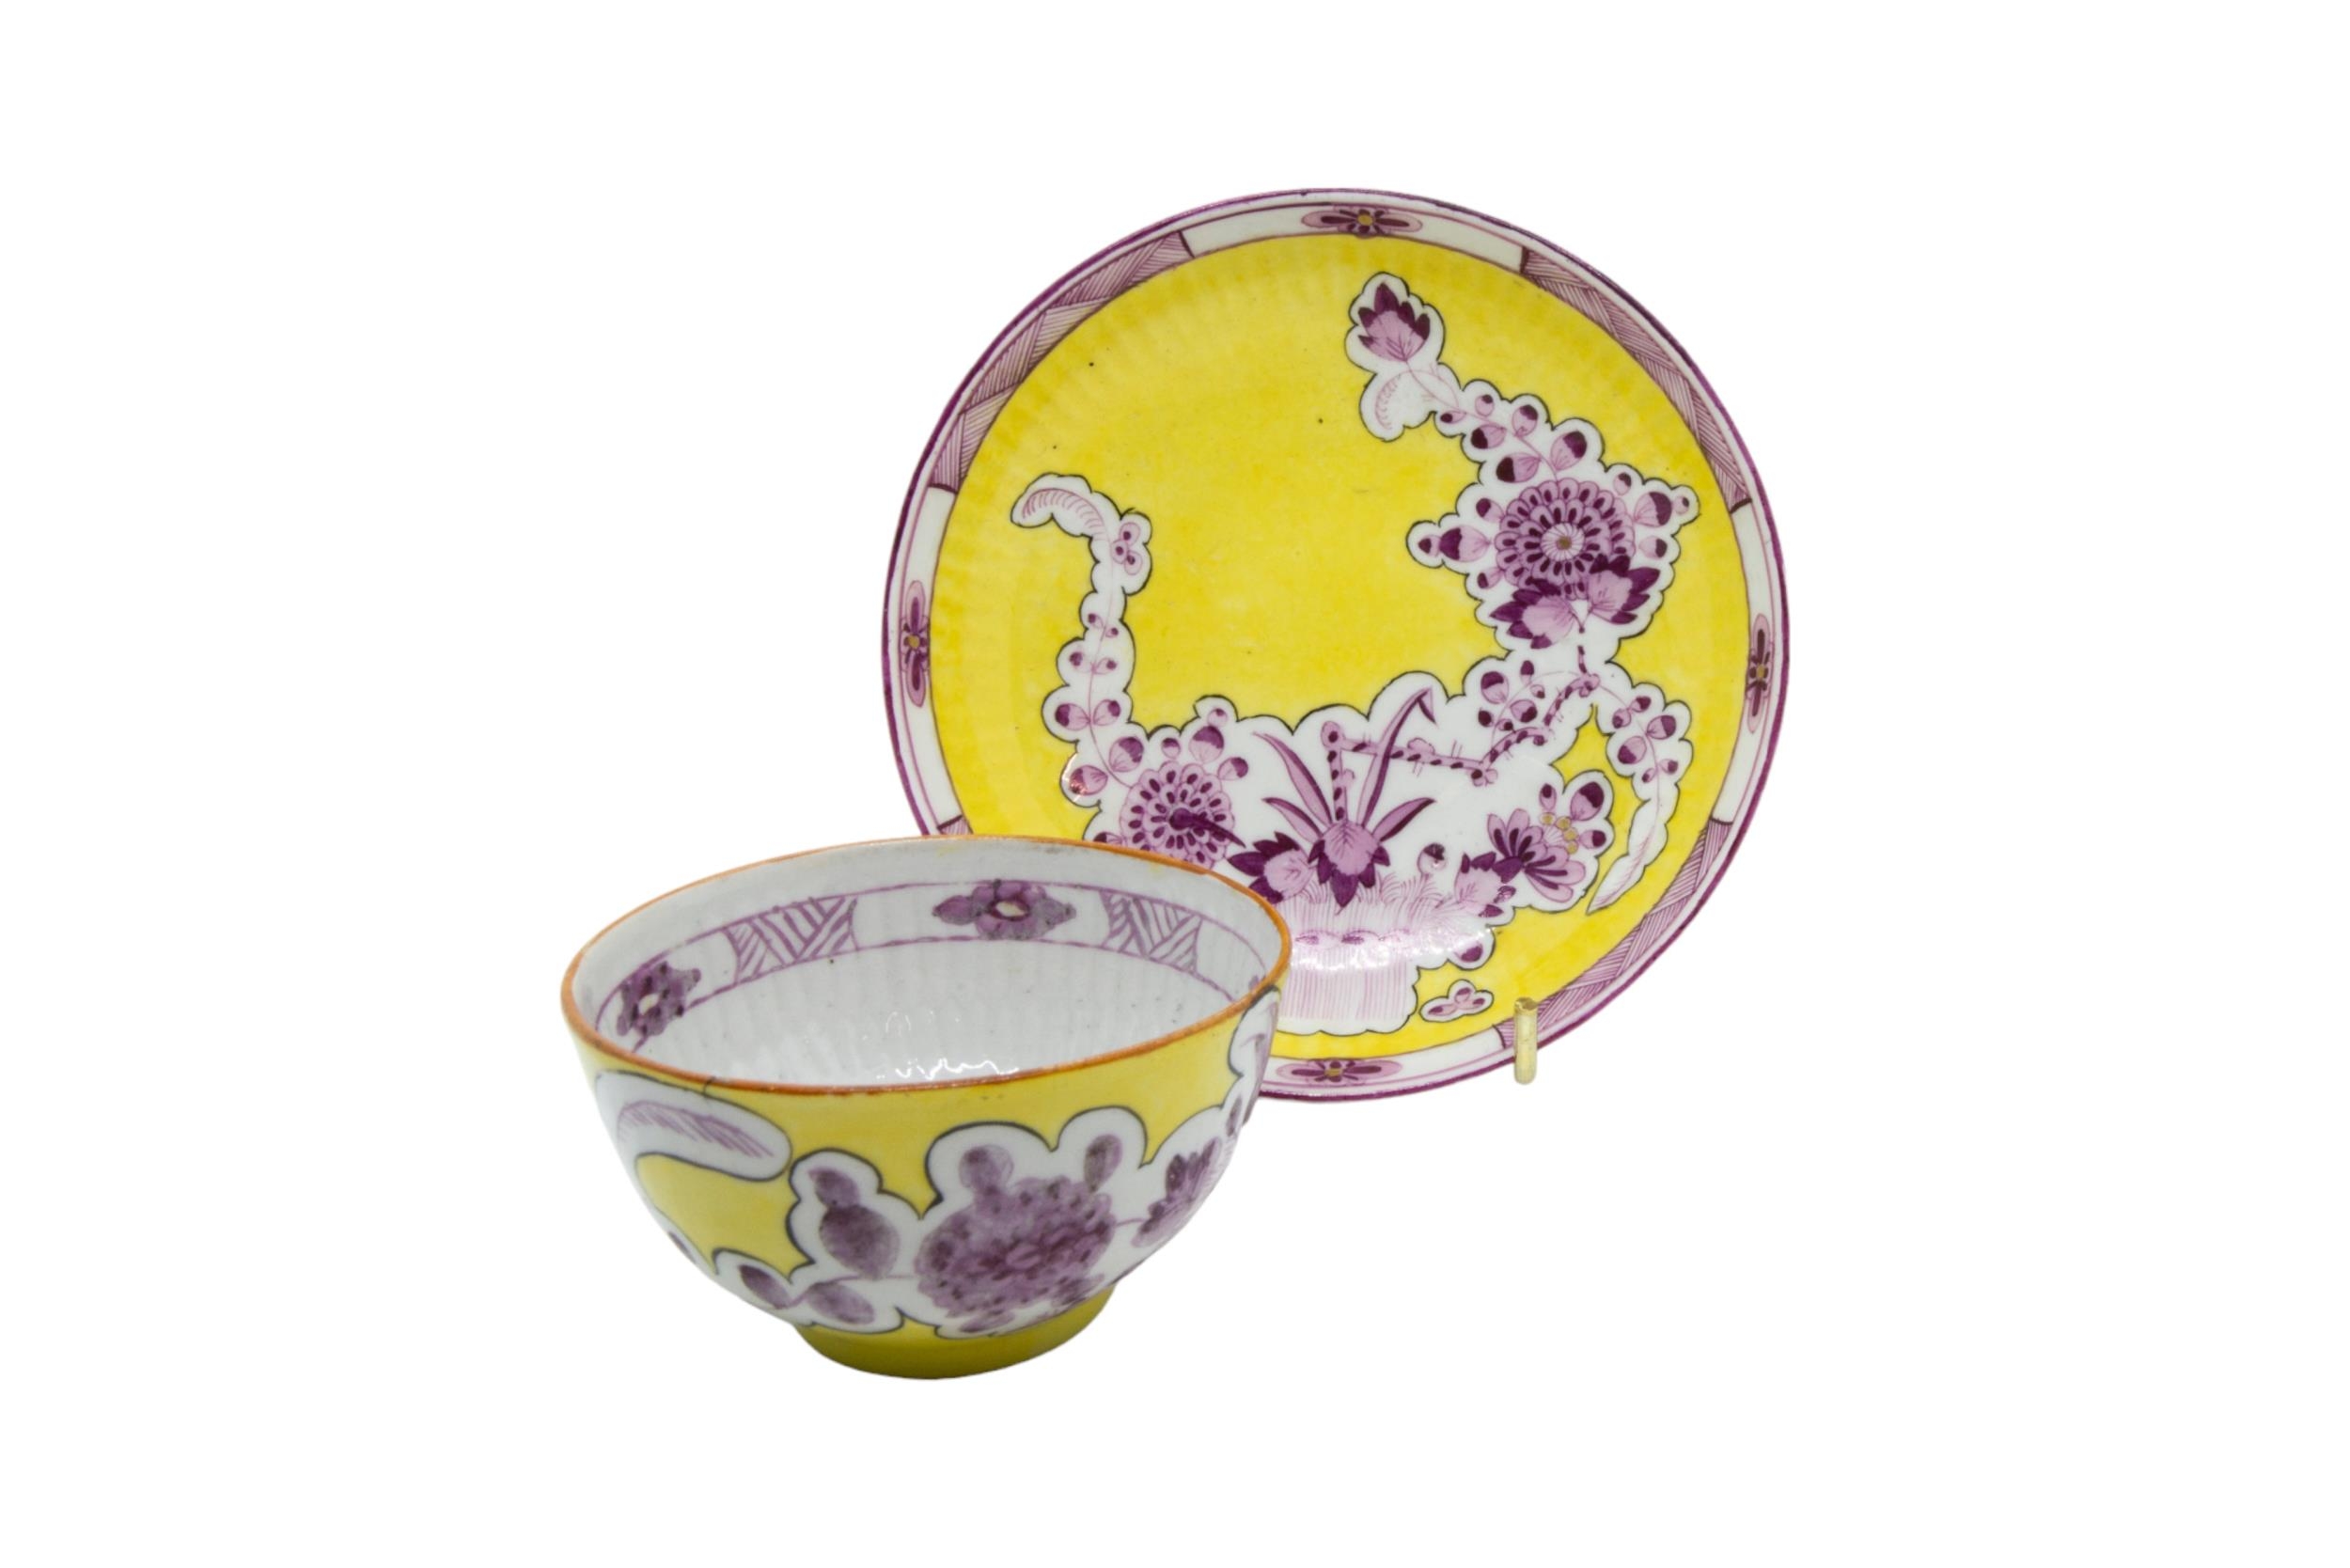 A MEISSEN CHAMBERSTICK AND MEISSEN CUP AND SAUCER, 18TH/19TH CENTURY, the lobed chamberstick painted - Image 3 of 7